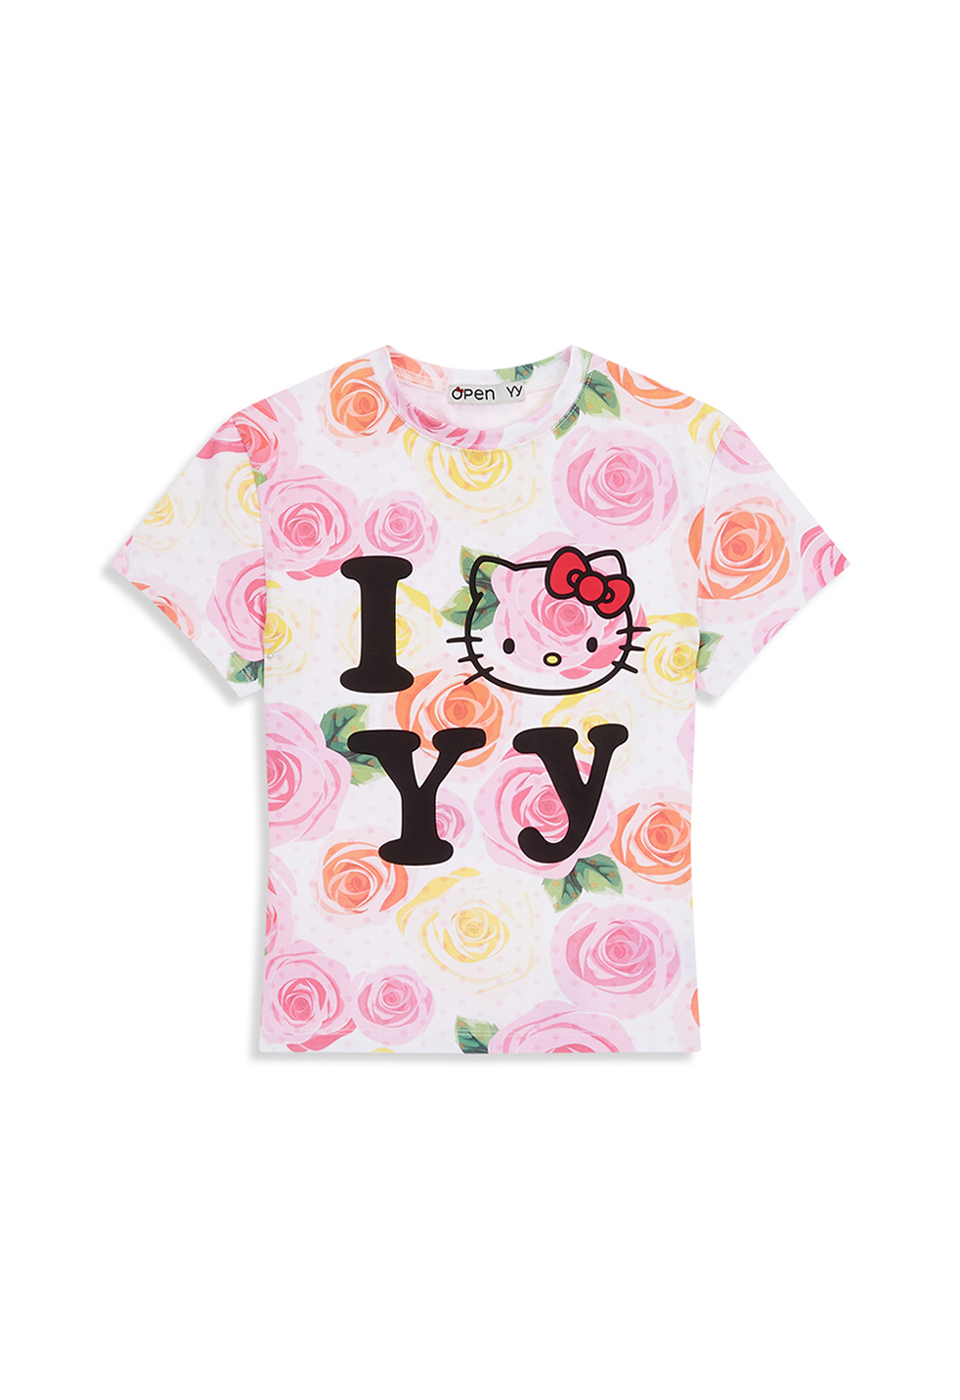 [6/18 DELIVERY] HELLO KITTY X YY BABY TEE, PINK